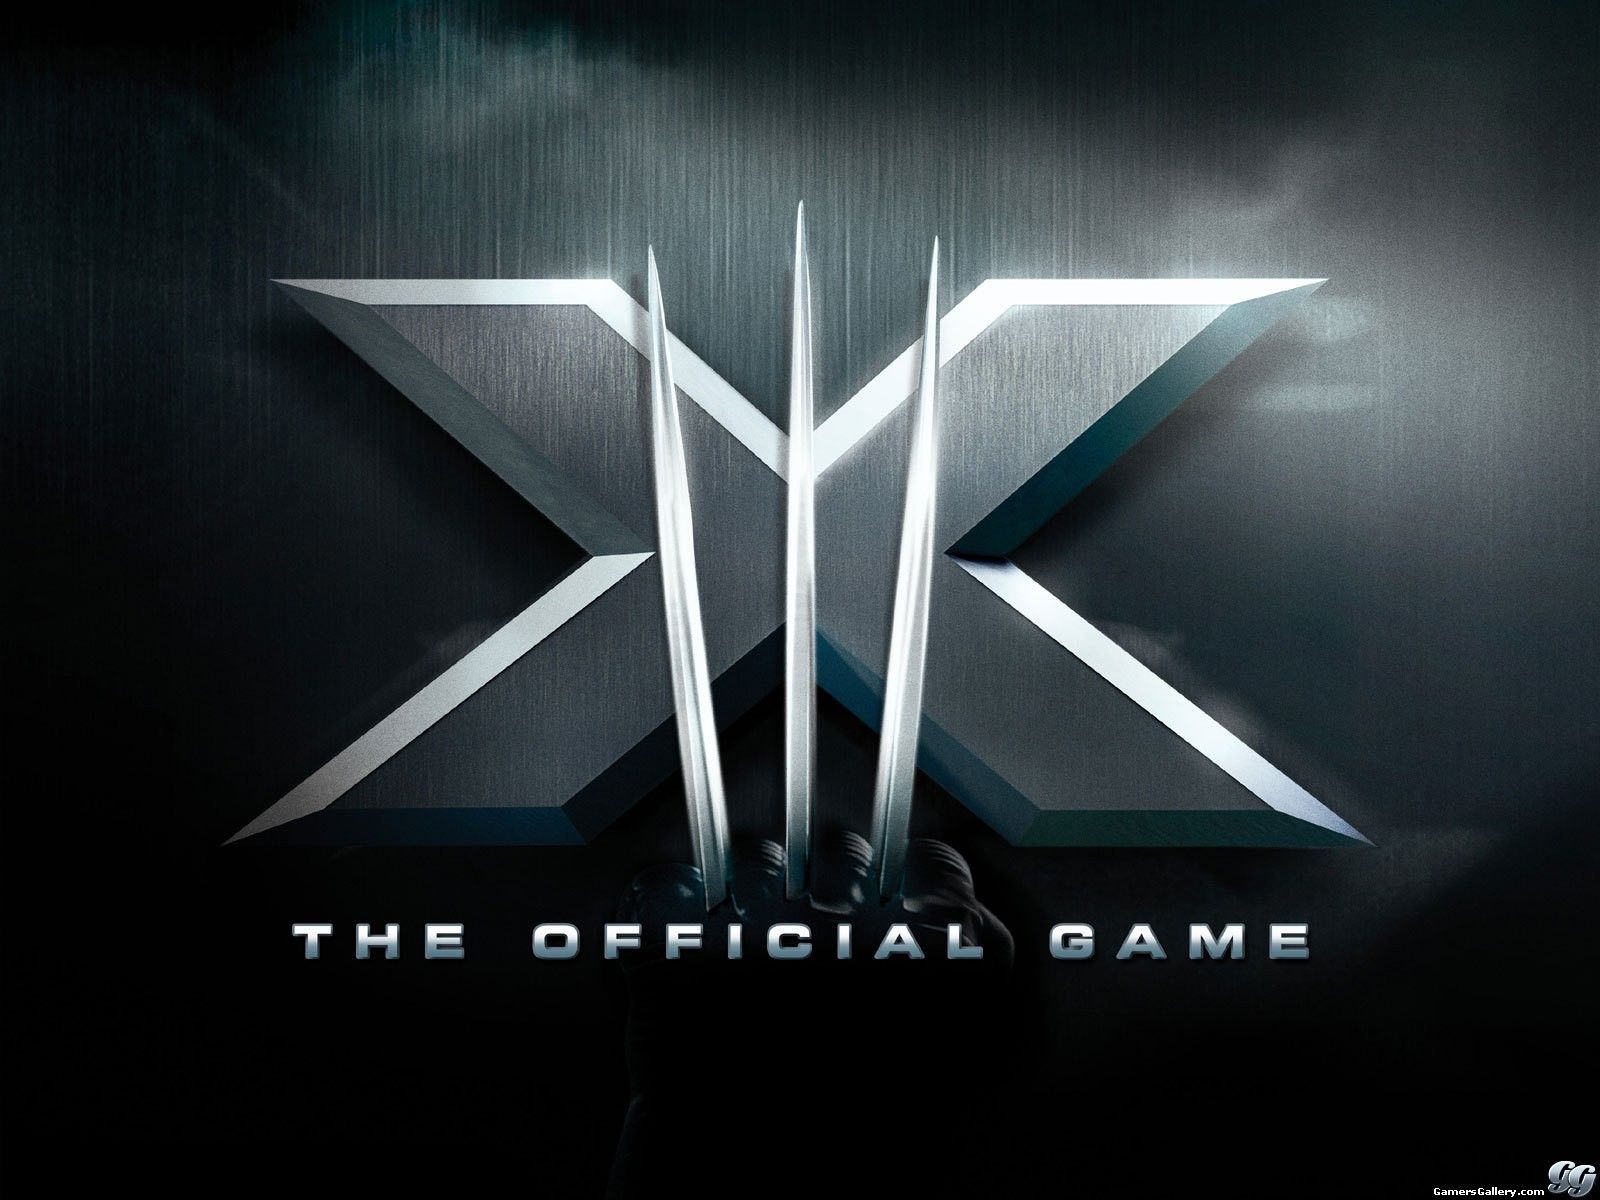 X Men: The Official Game Wallpaper, Video Game, HQ X Men: The Official Game PictureK Wallpaper 2019